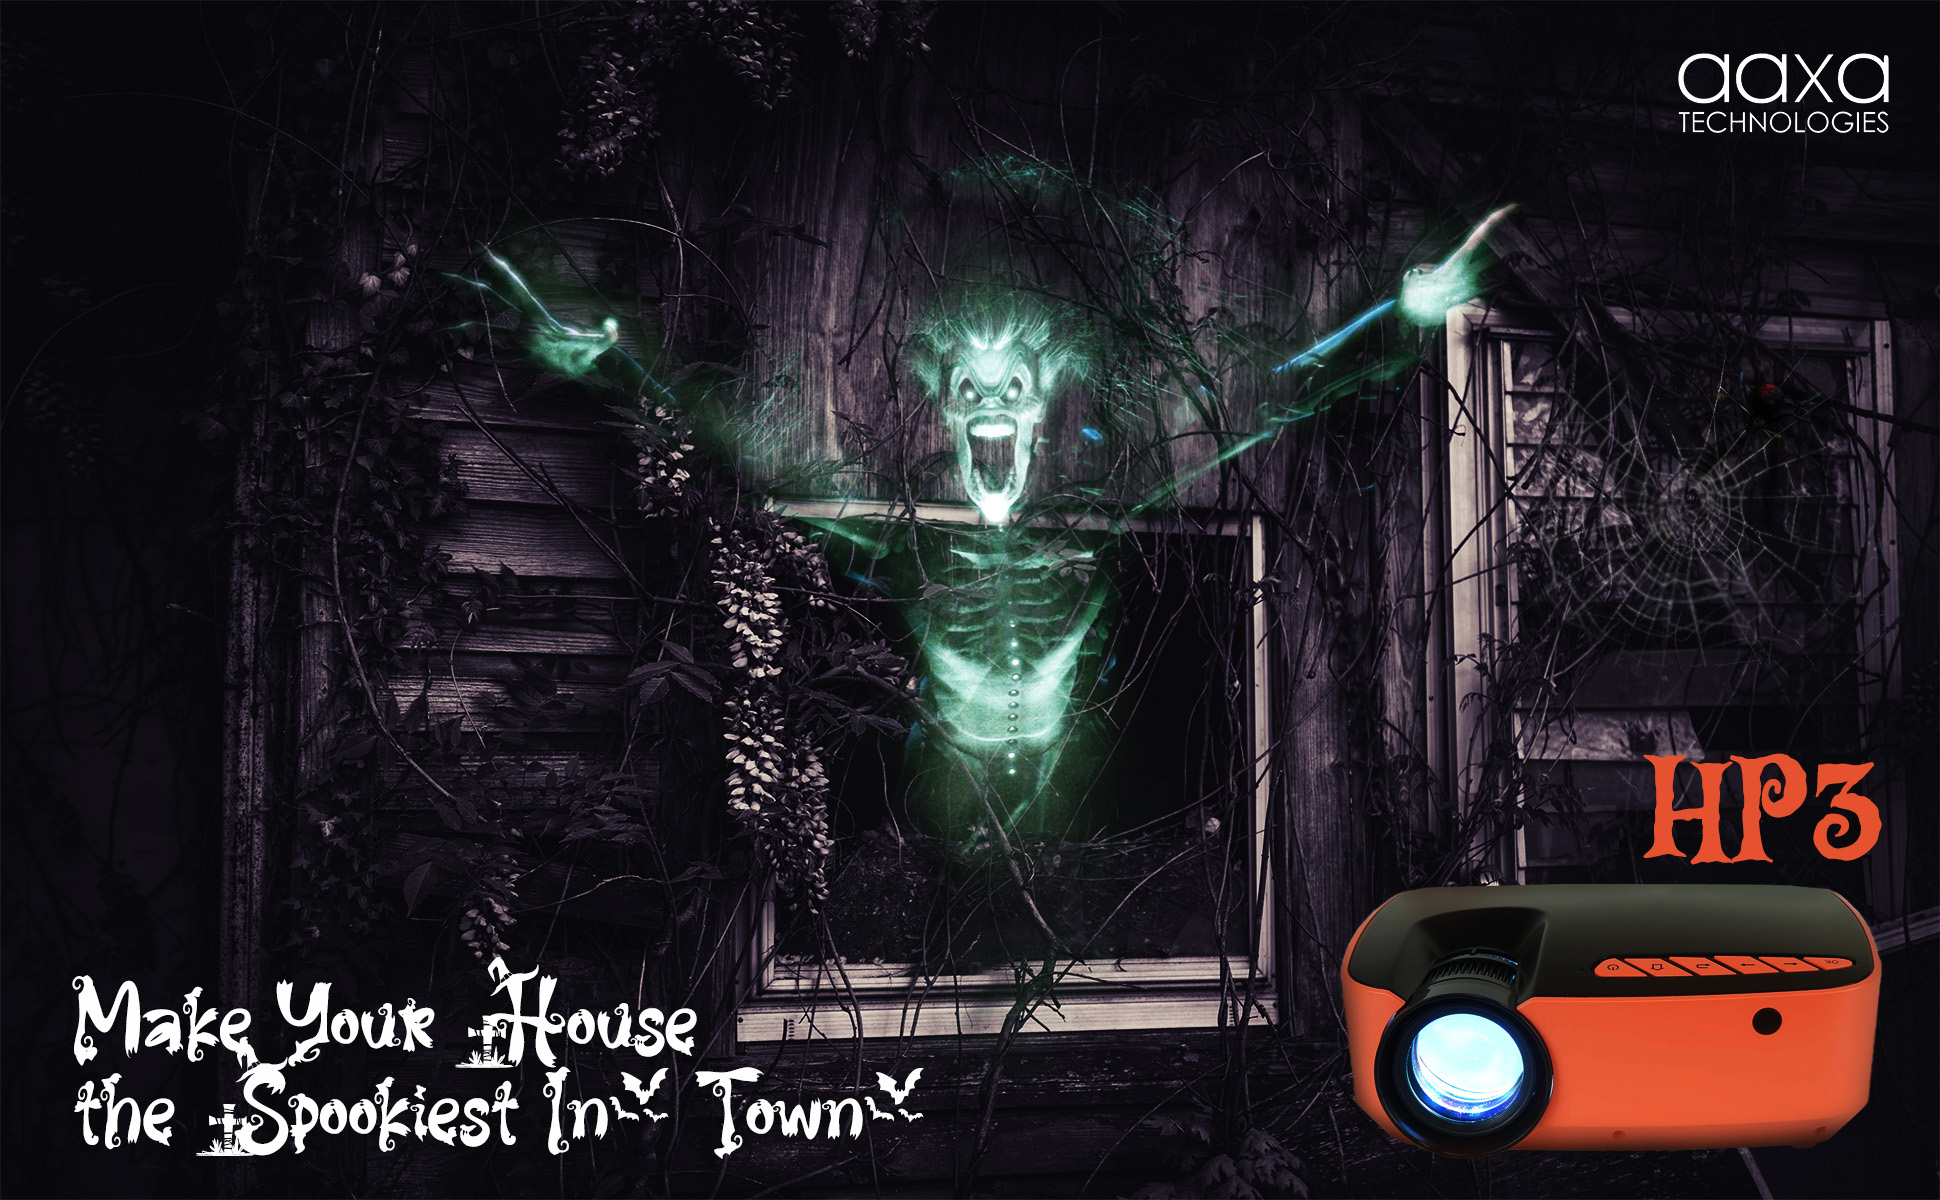 AAXA's HP3 LCD Projector allows for a great value experience for spooky Halloween thematics.